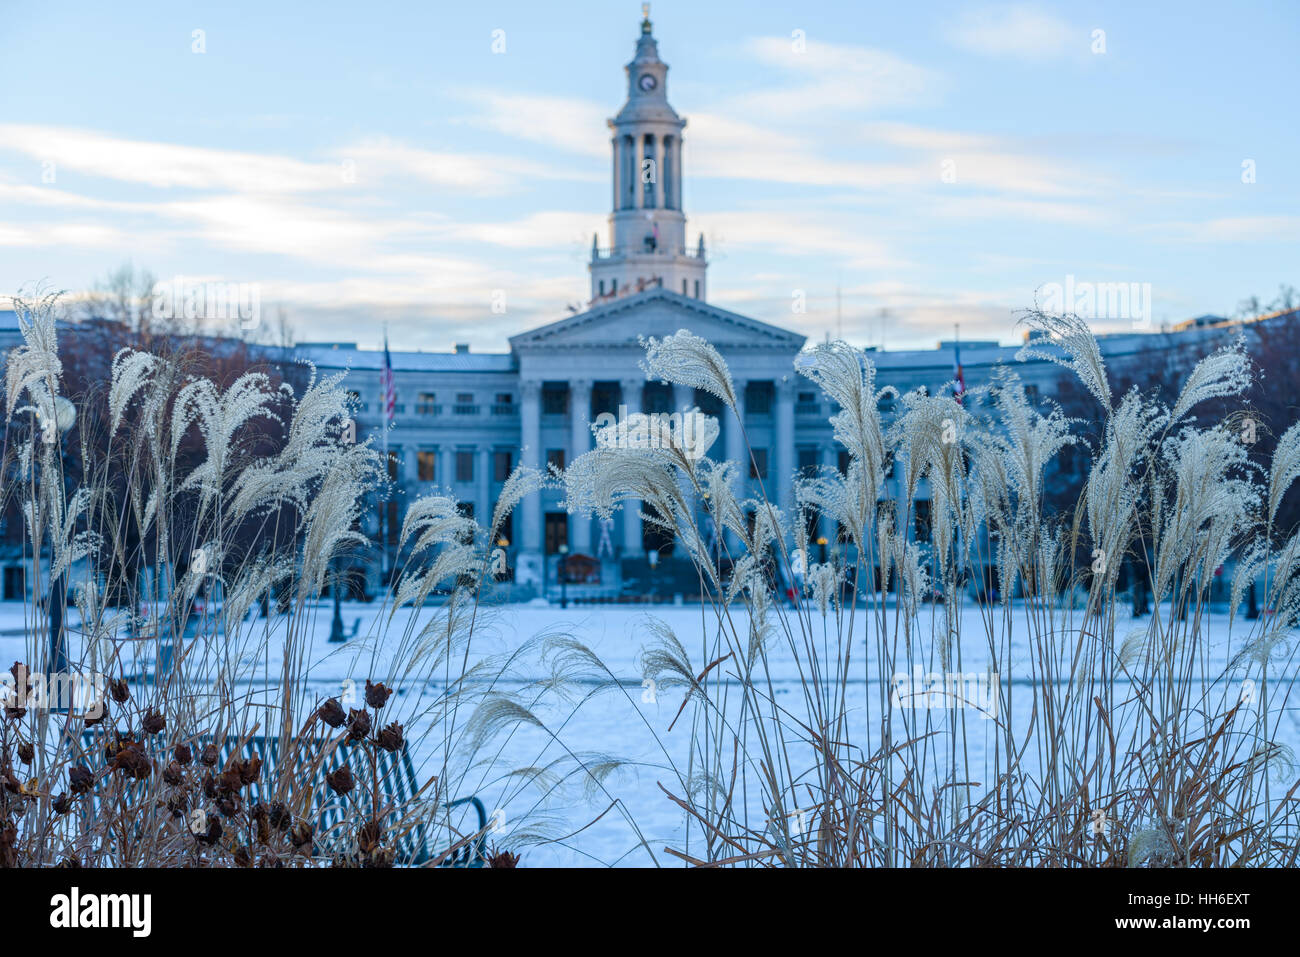 Winter at Denver Civic Center - A cold December evening at Denver Civic Center. The Denver City Hall rising in background. Stock Photo